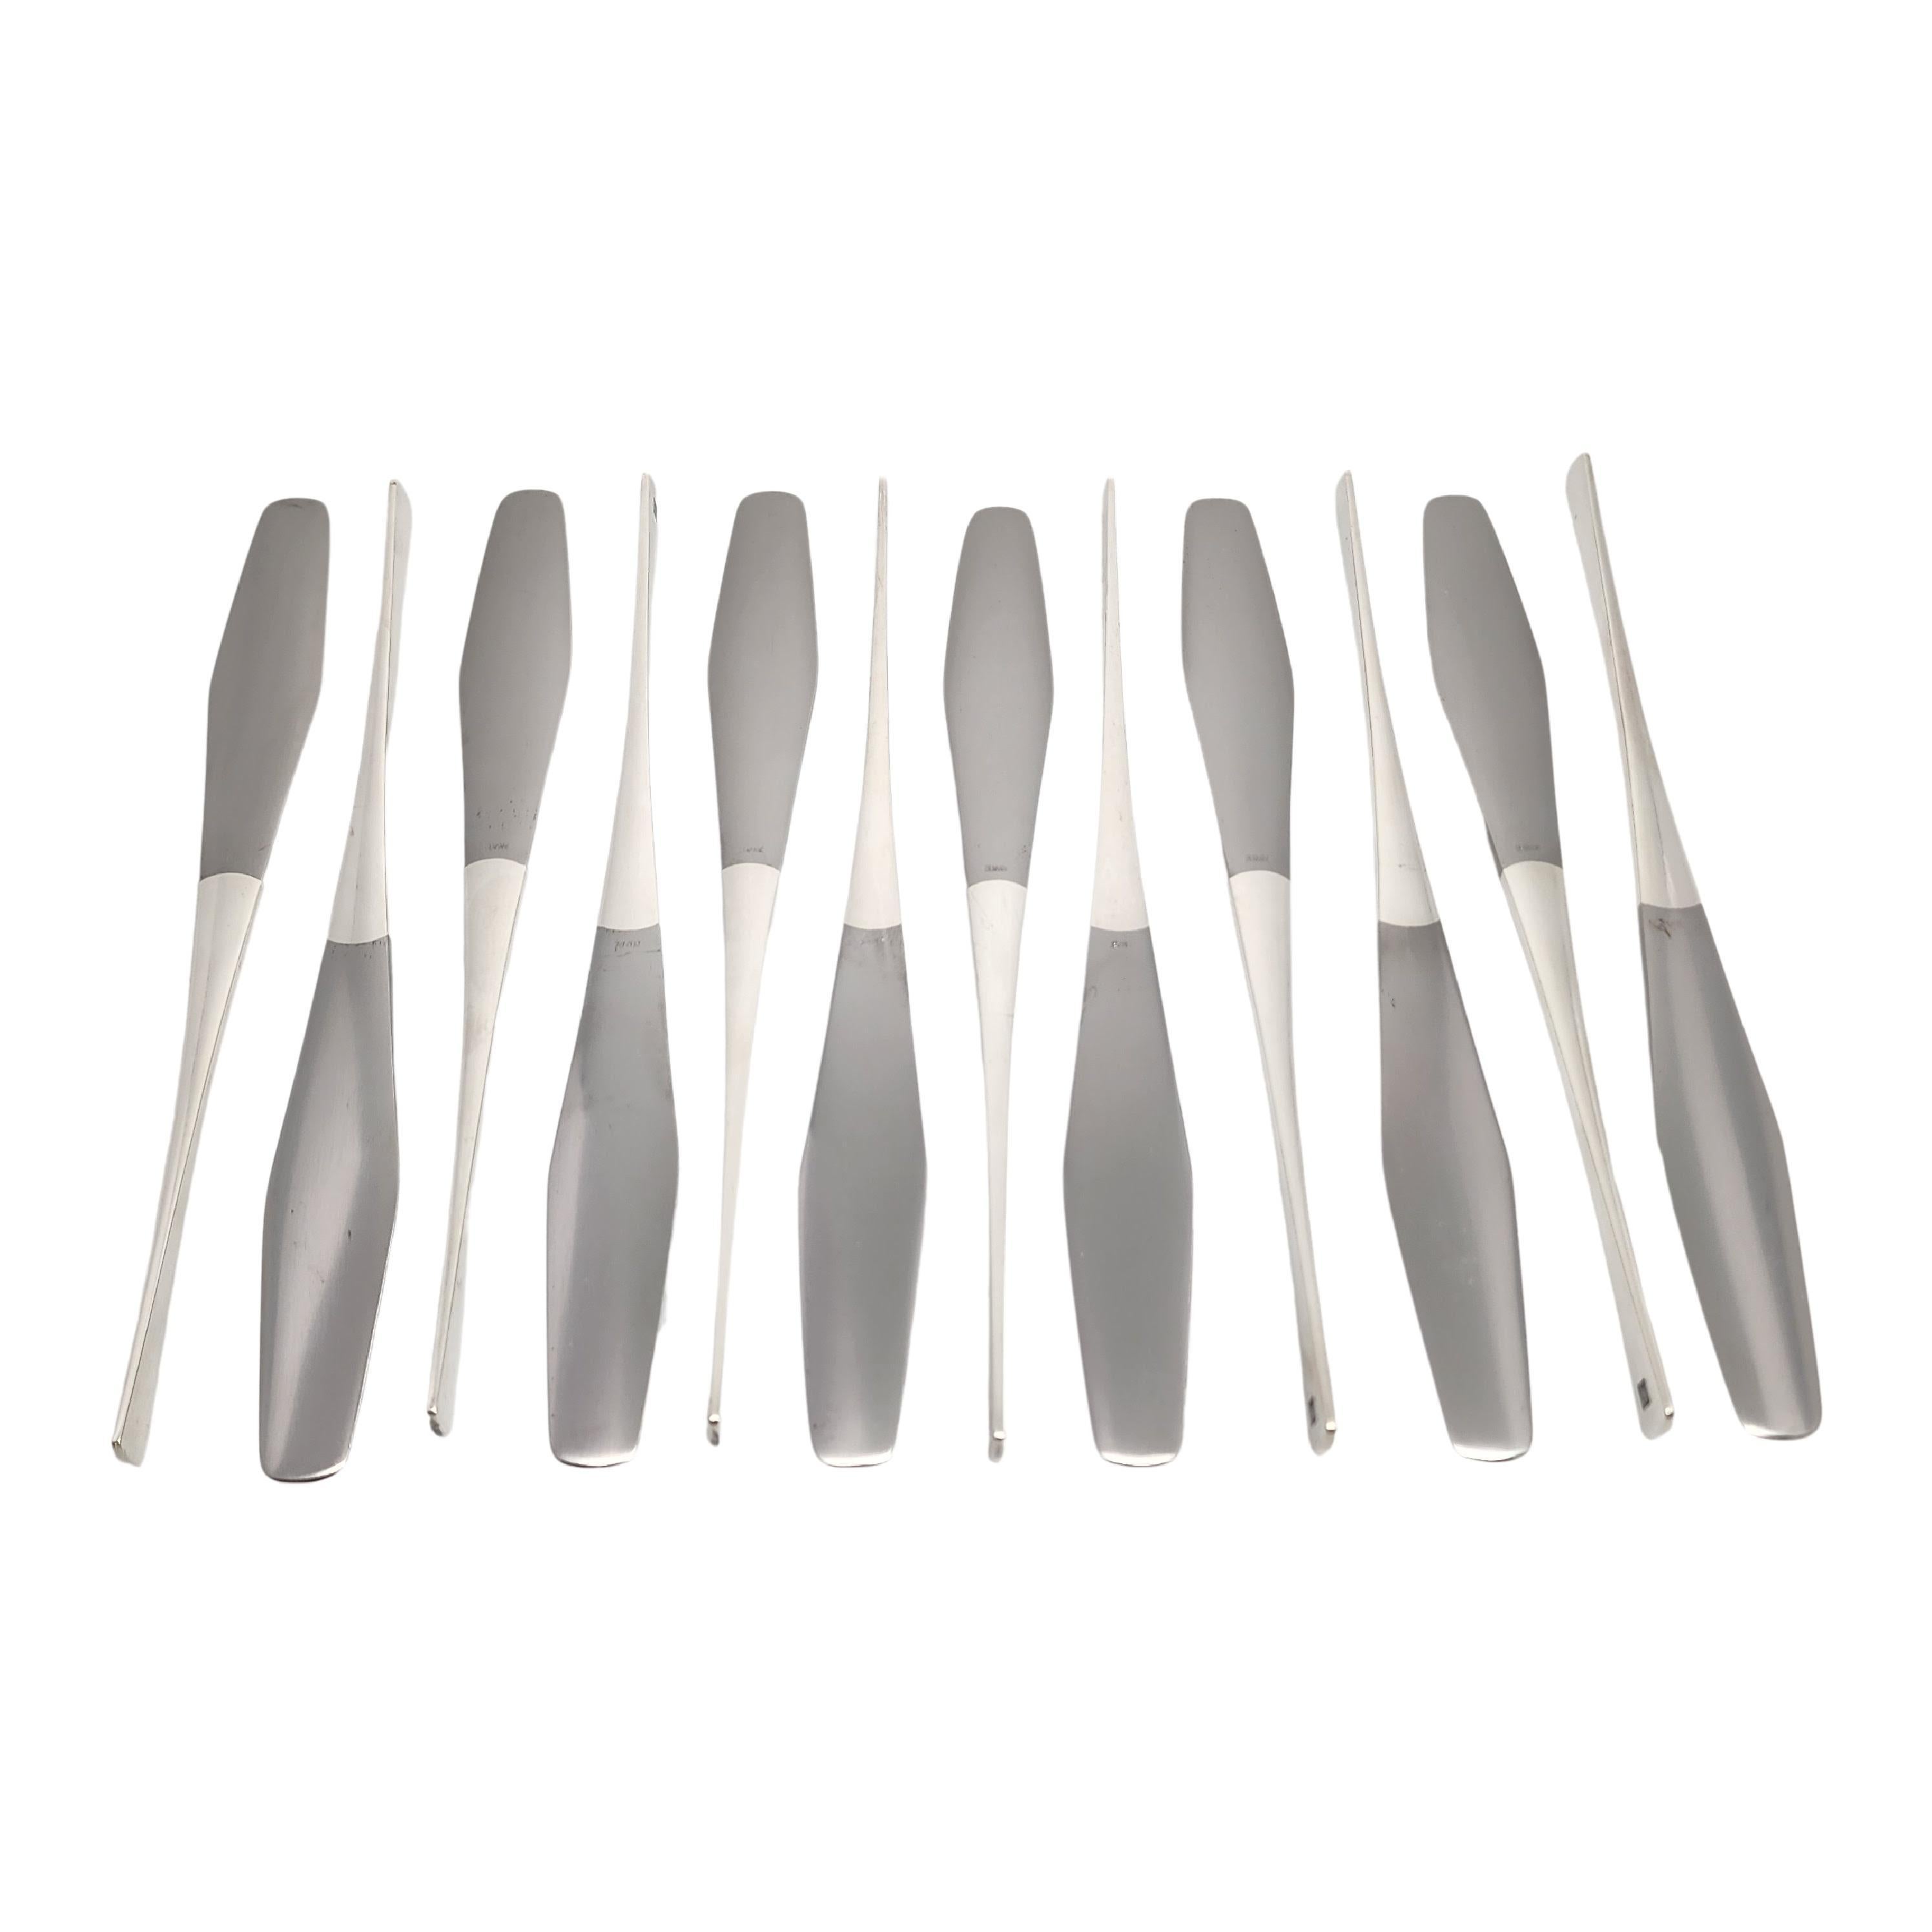 Set of 12 sterling silver handle, stainless blade knives in the Tjorn pattern by Dansk.

No monogram

Mid-Century modern knives designed by Jens Quistgaard in 1959. Classic Scandinavian modern design, these knives feature a 90 degree turn from the